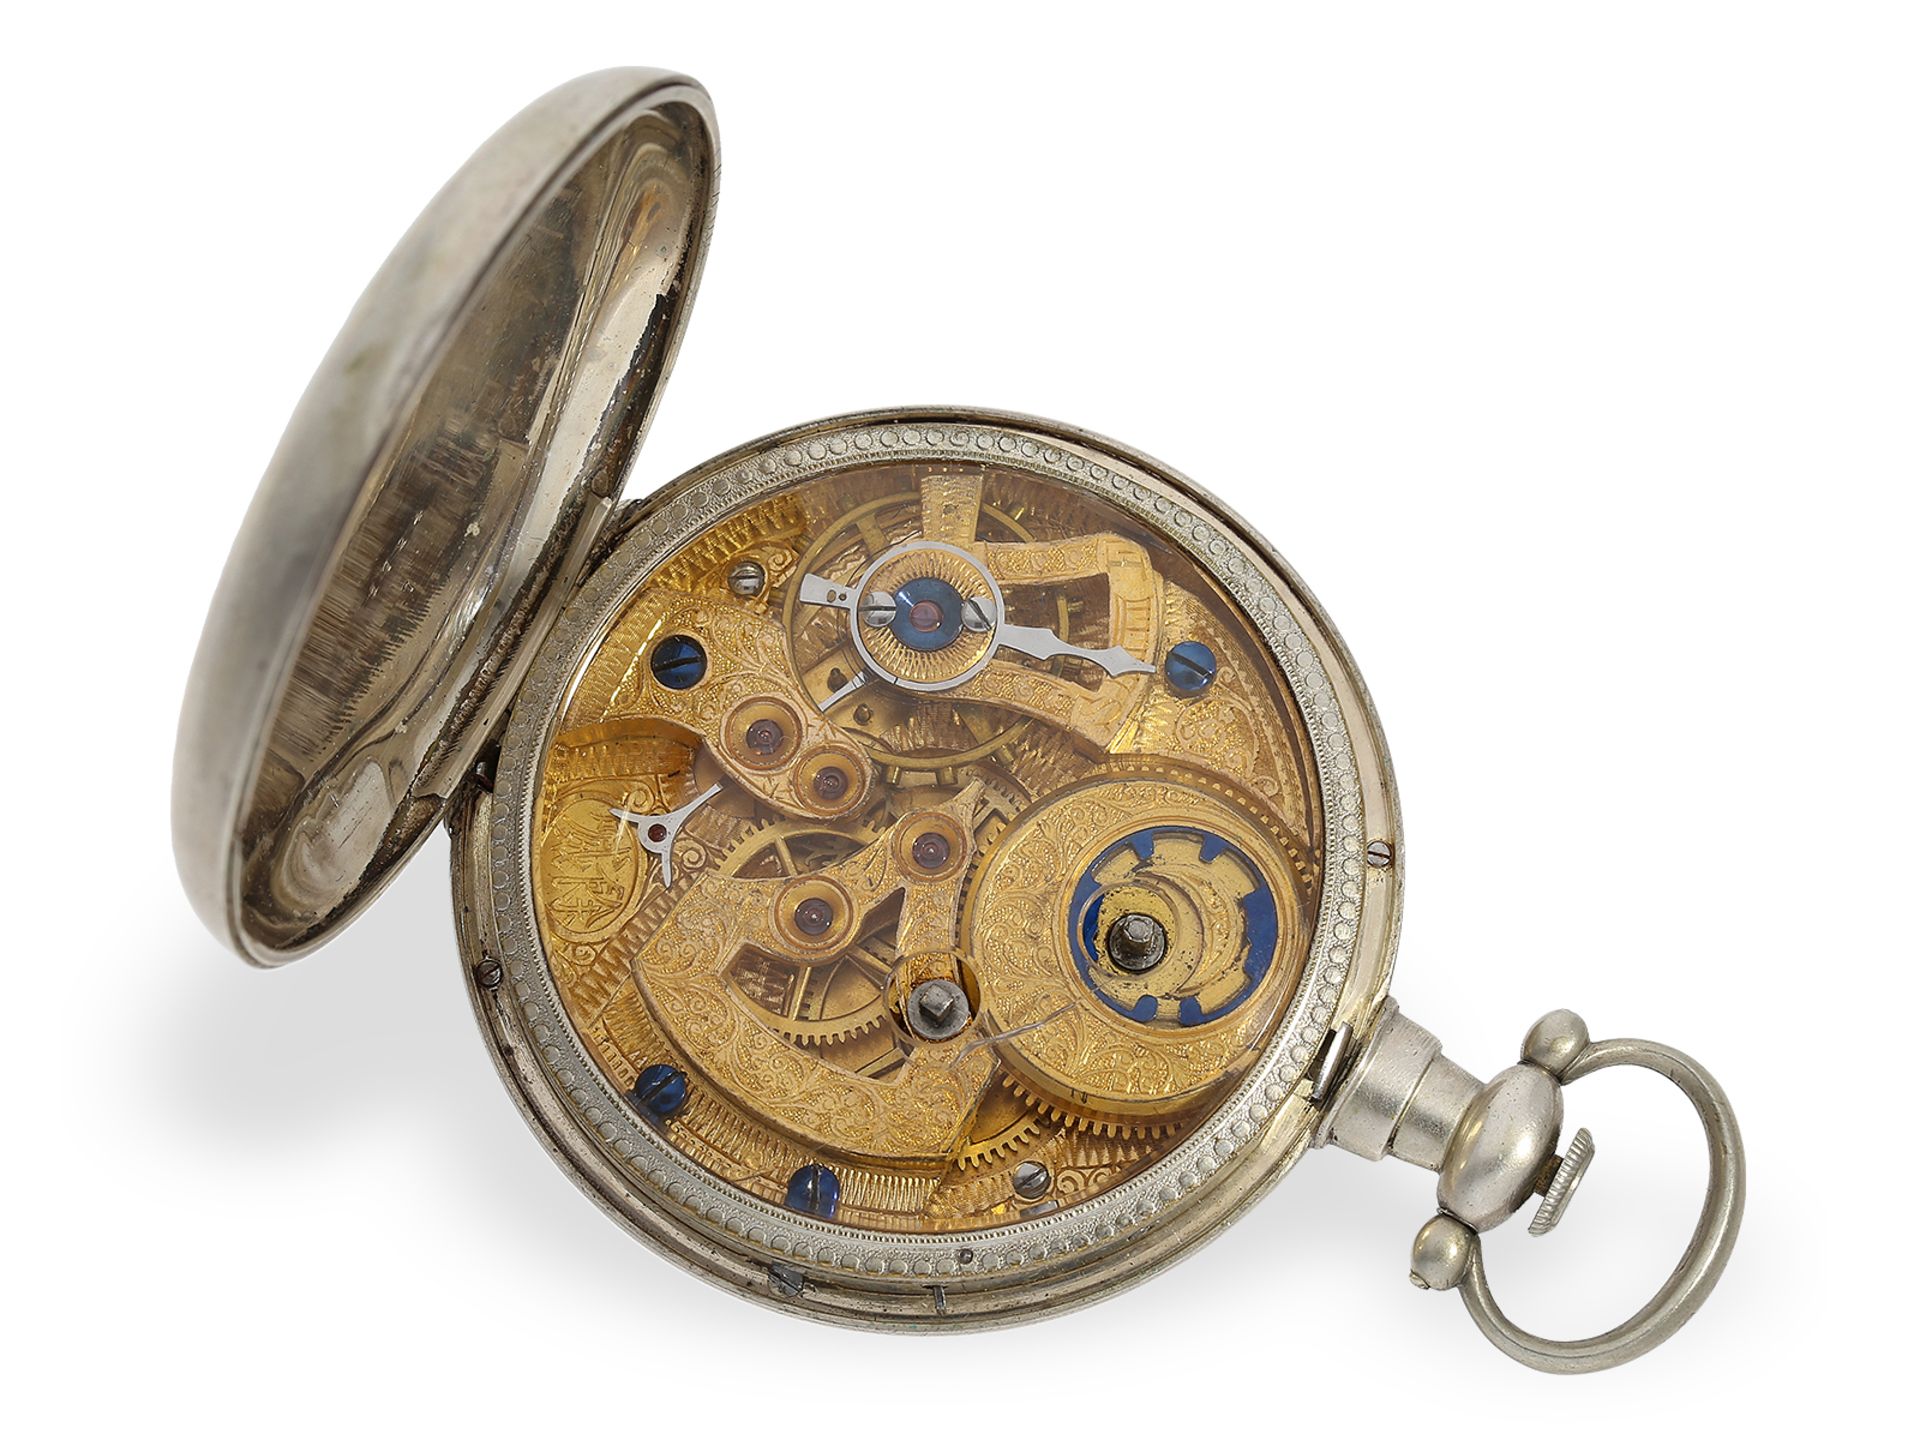 Pocket watch: fine Fleurier pocket watch with centre seconds, Bovet for the Chinese market, ca. 1850 - Image 2 of 5